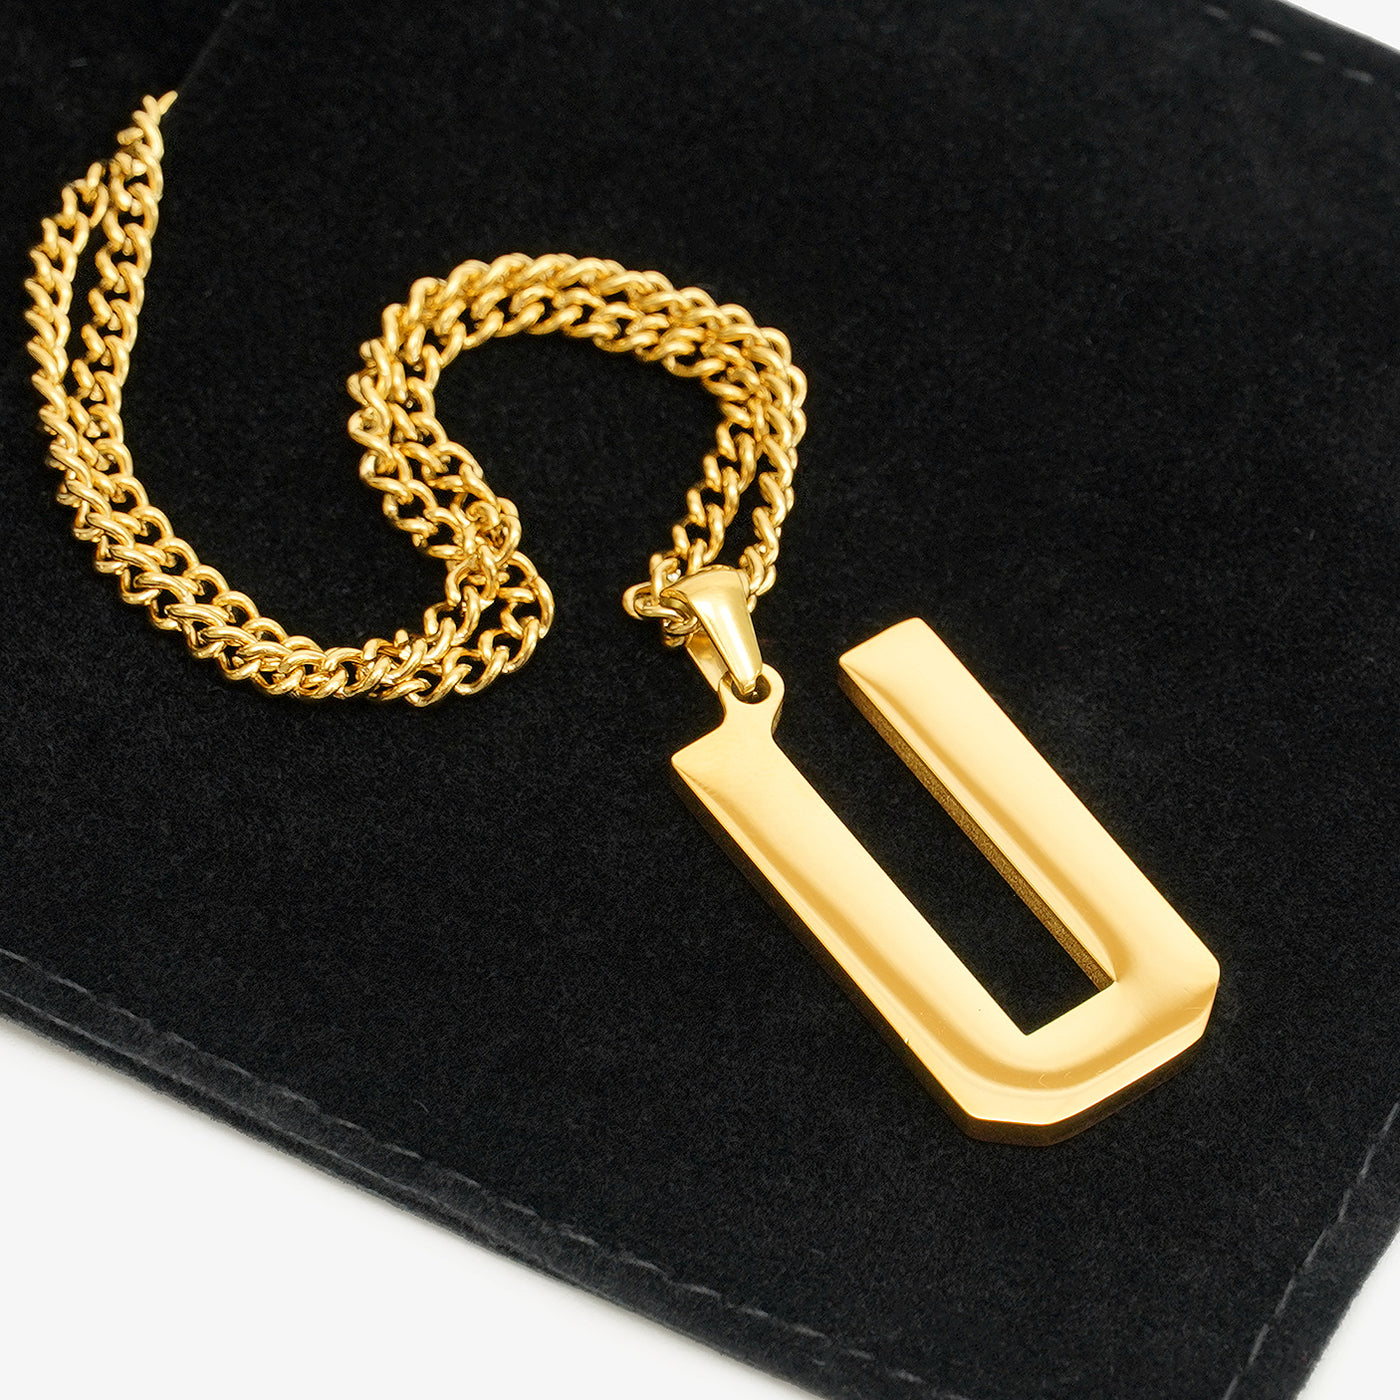 U Letter Pendant with Chain Necklace - Gold Plated Stainless Steel